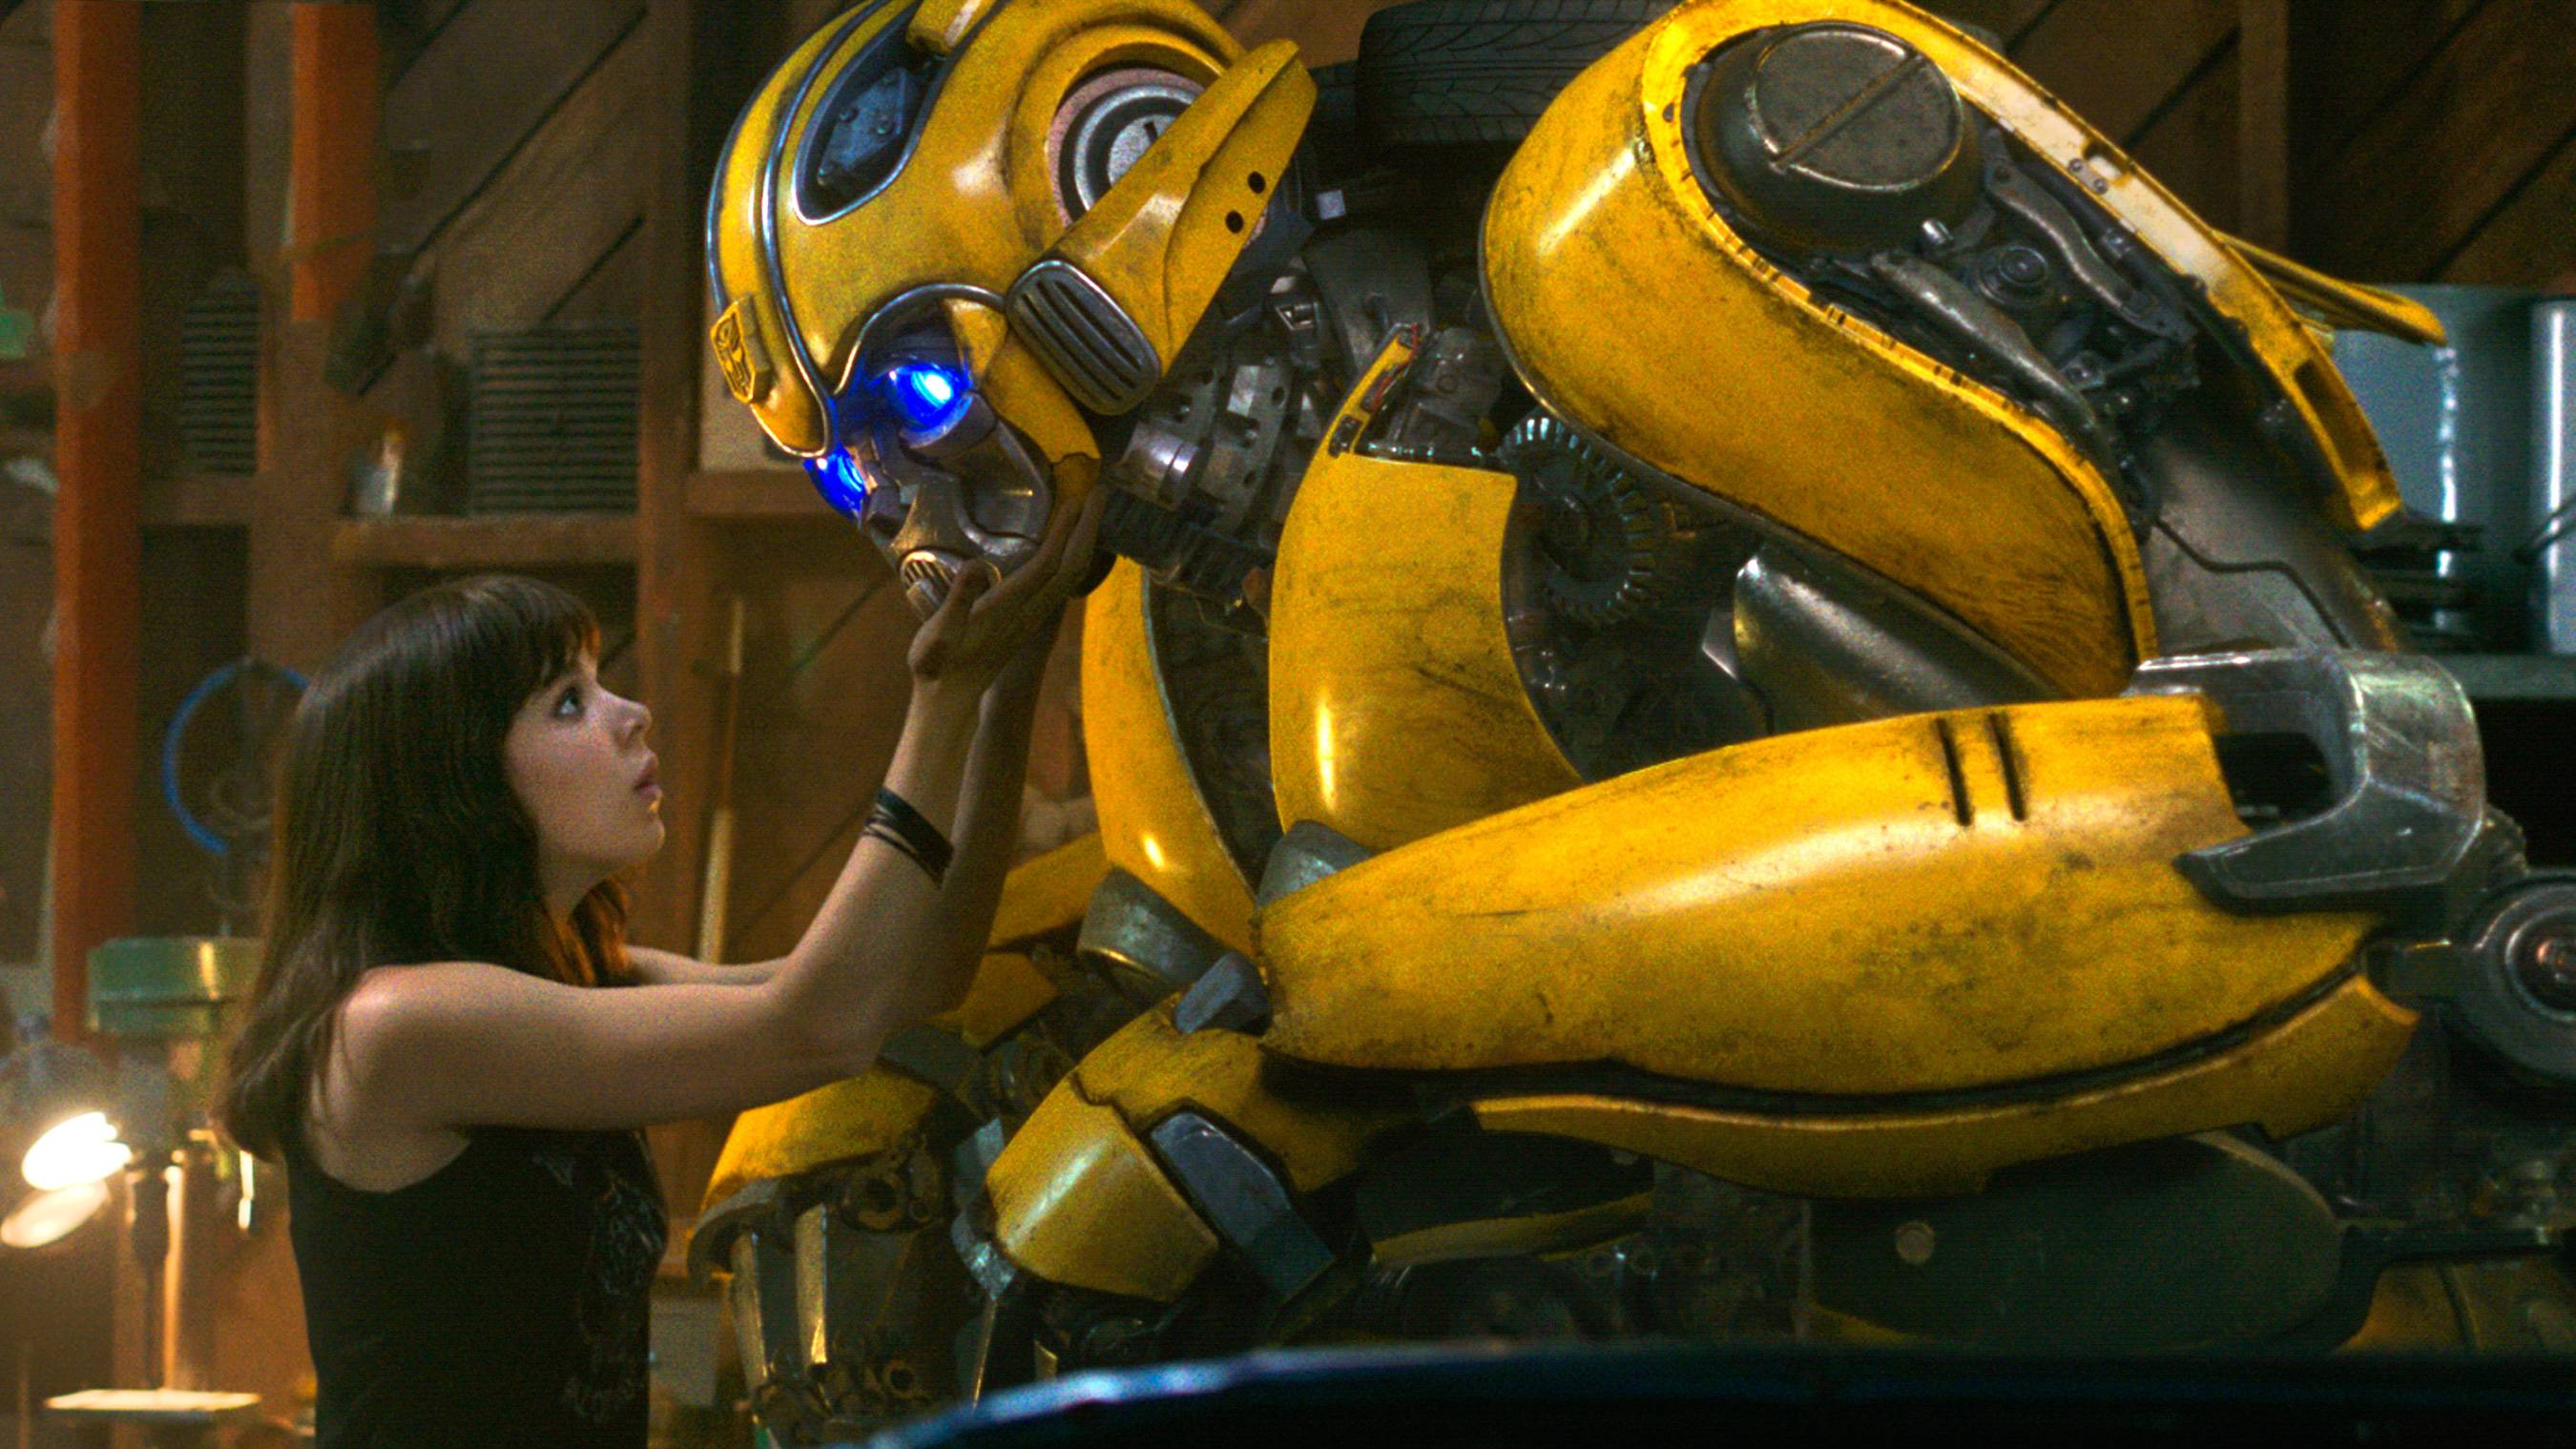 HD Wallpaper Of Hailee Steinfeld And Bumblebee In The 2018 Bumblebee